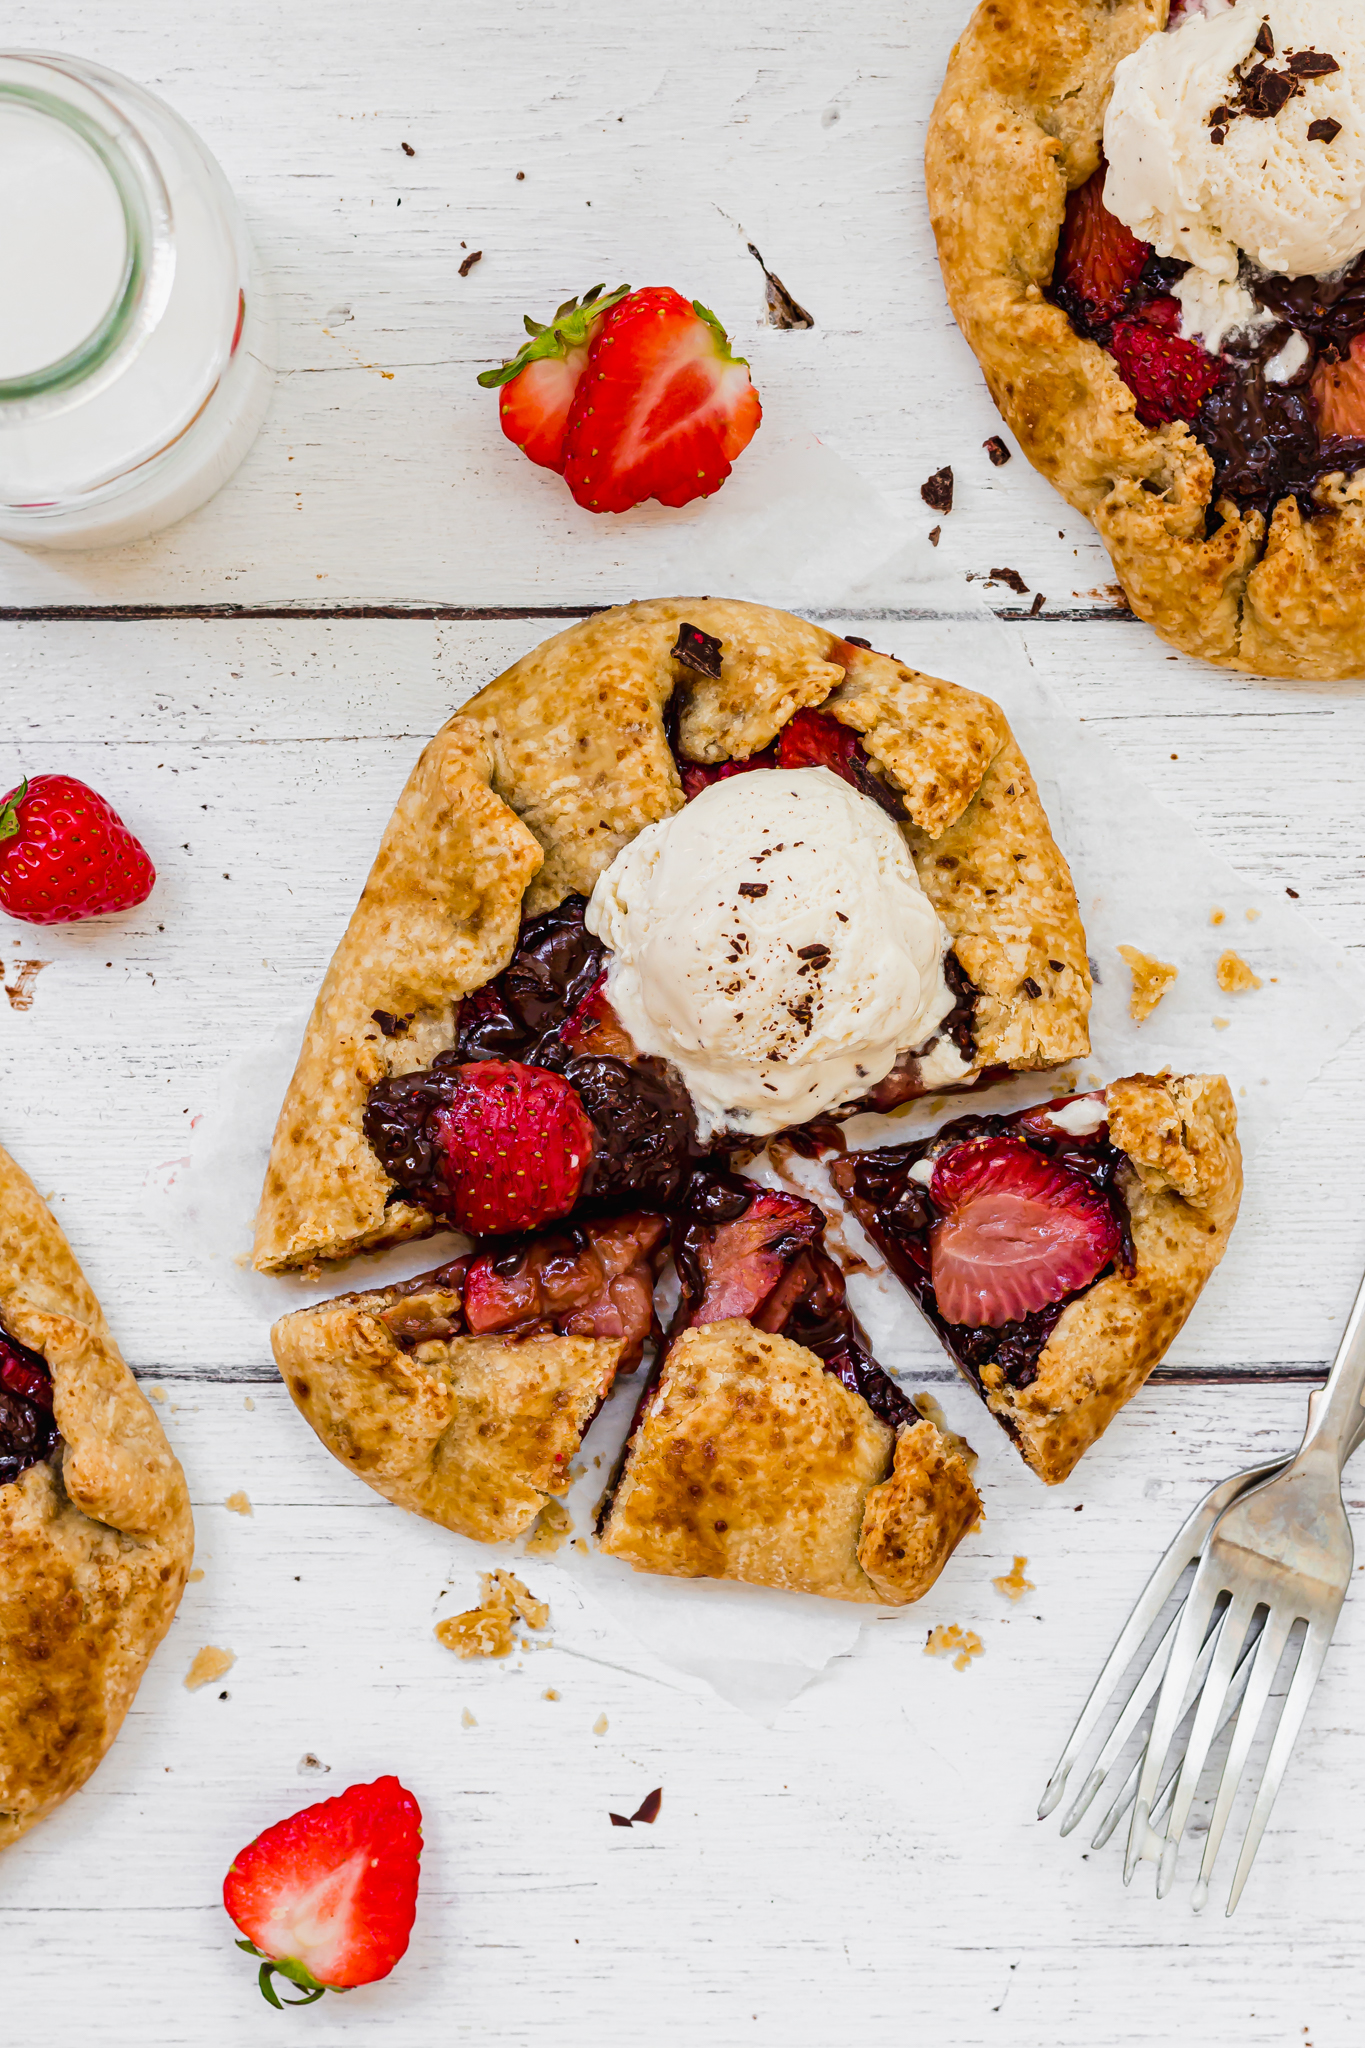 Strawberry Chocolate Galettes